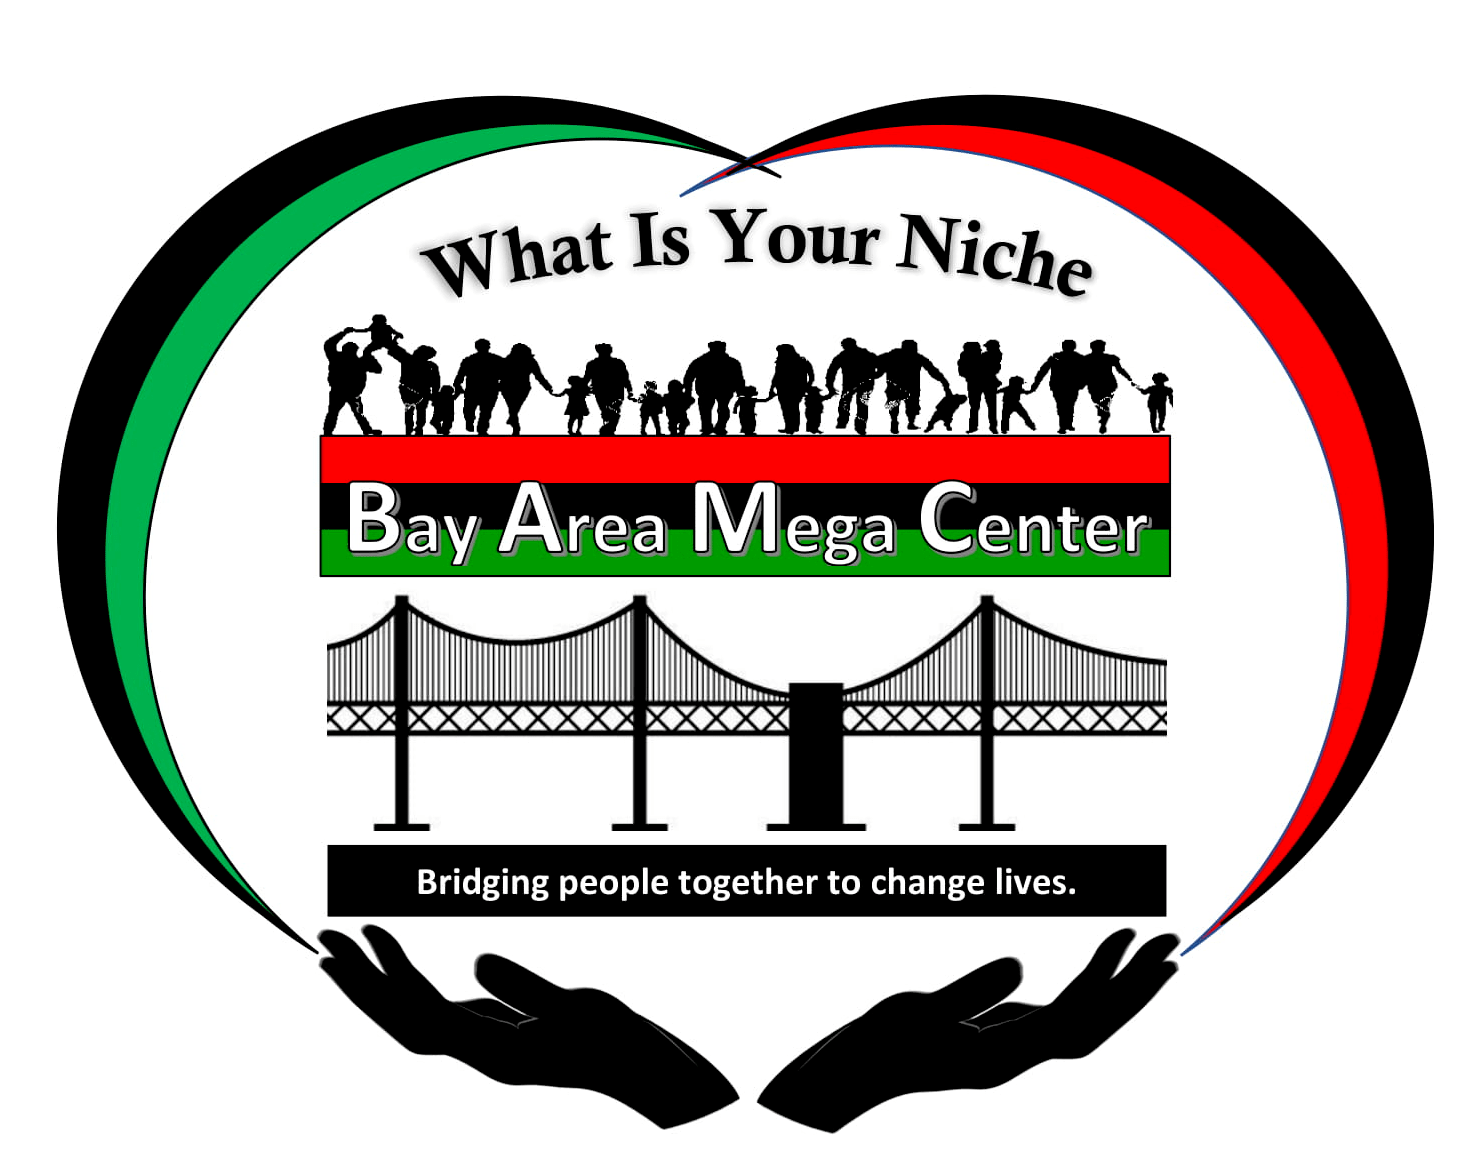 What Is Your Niche Bay Area Mega Center logo